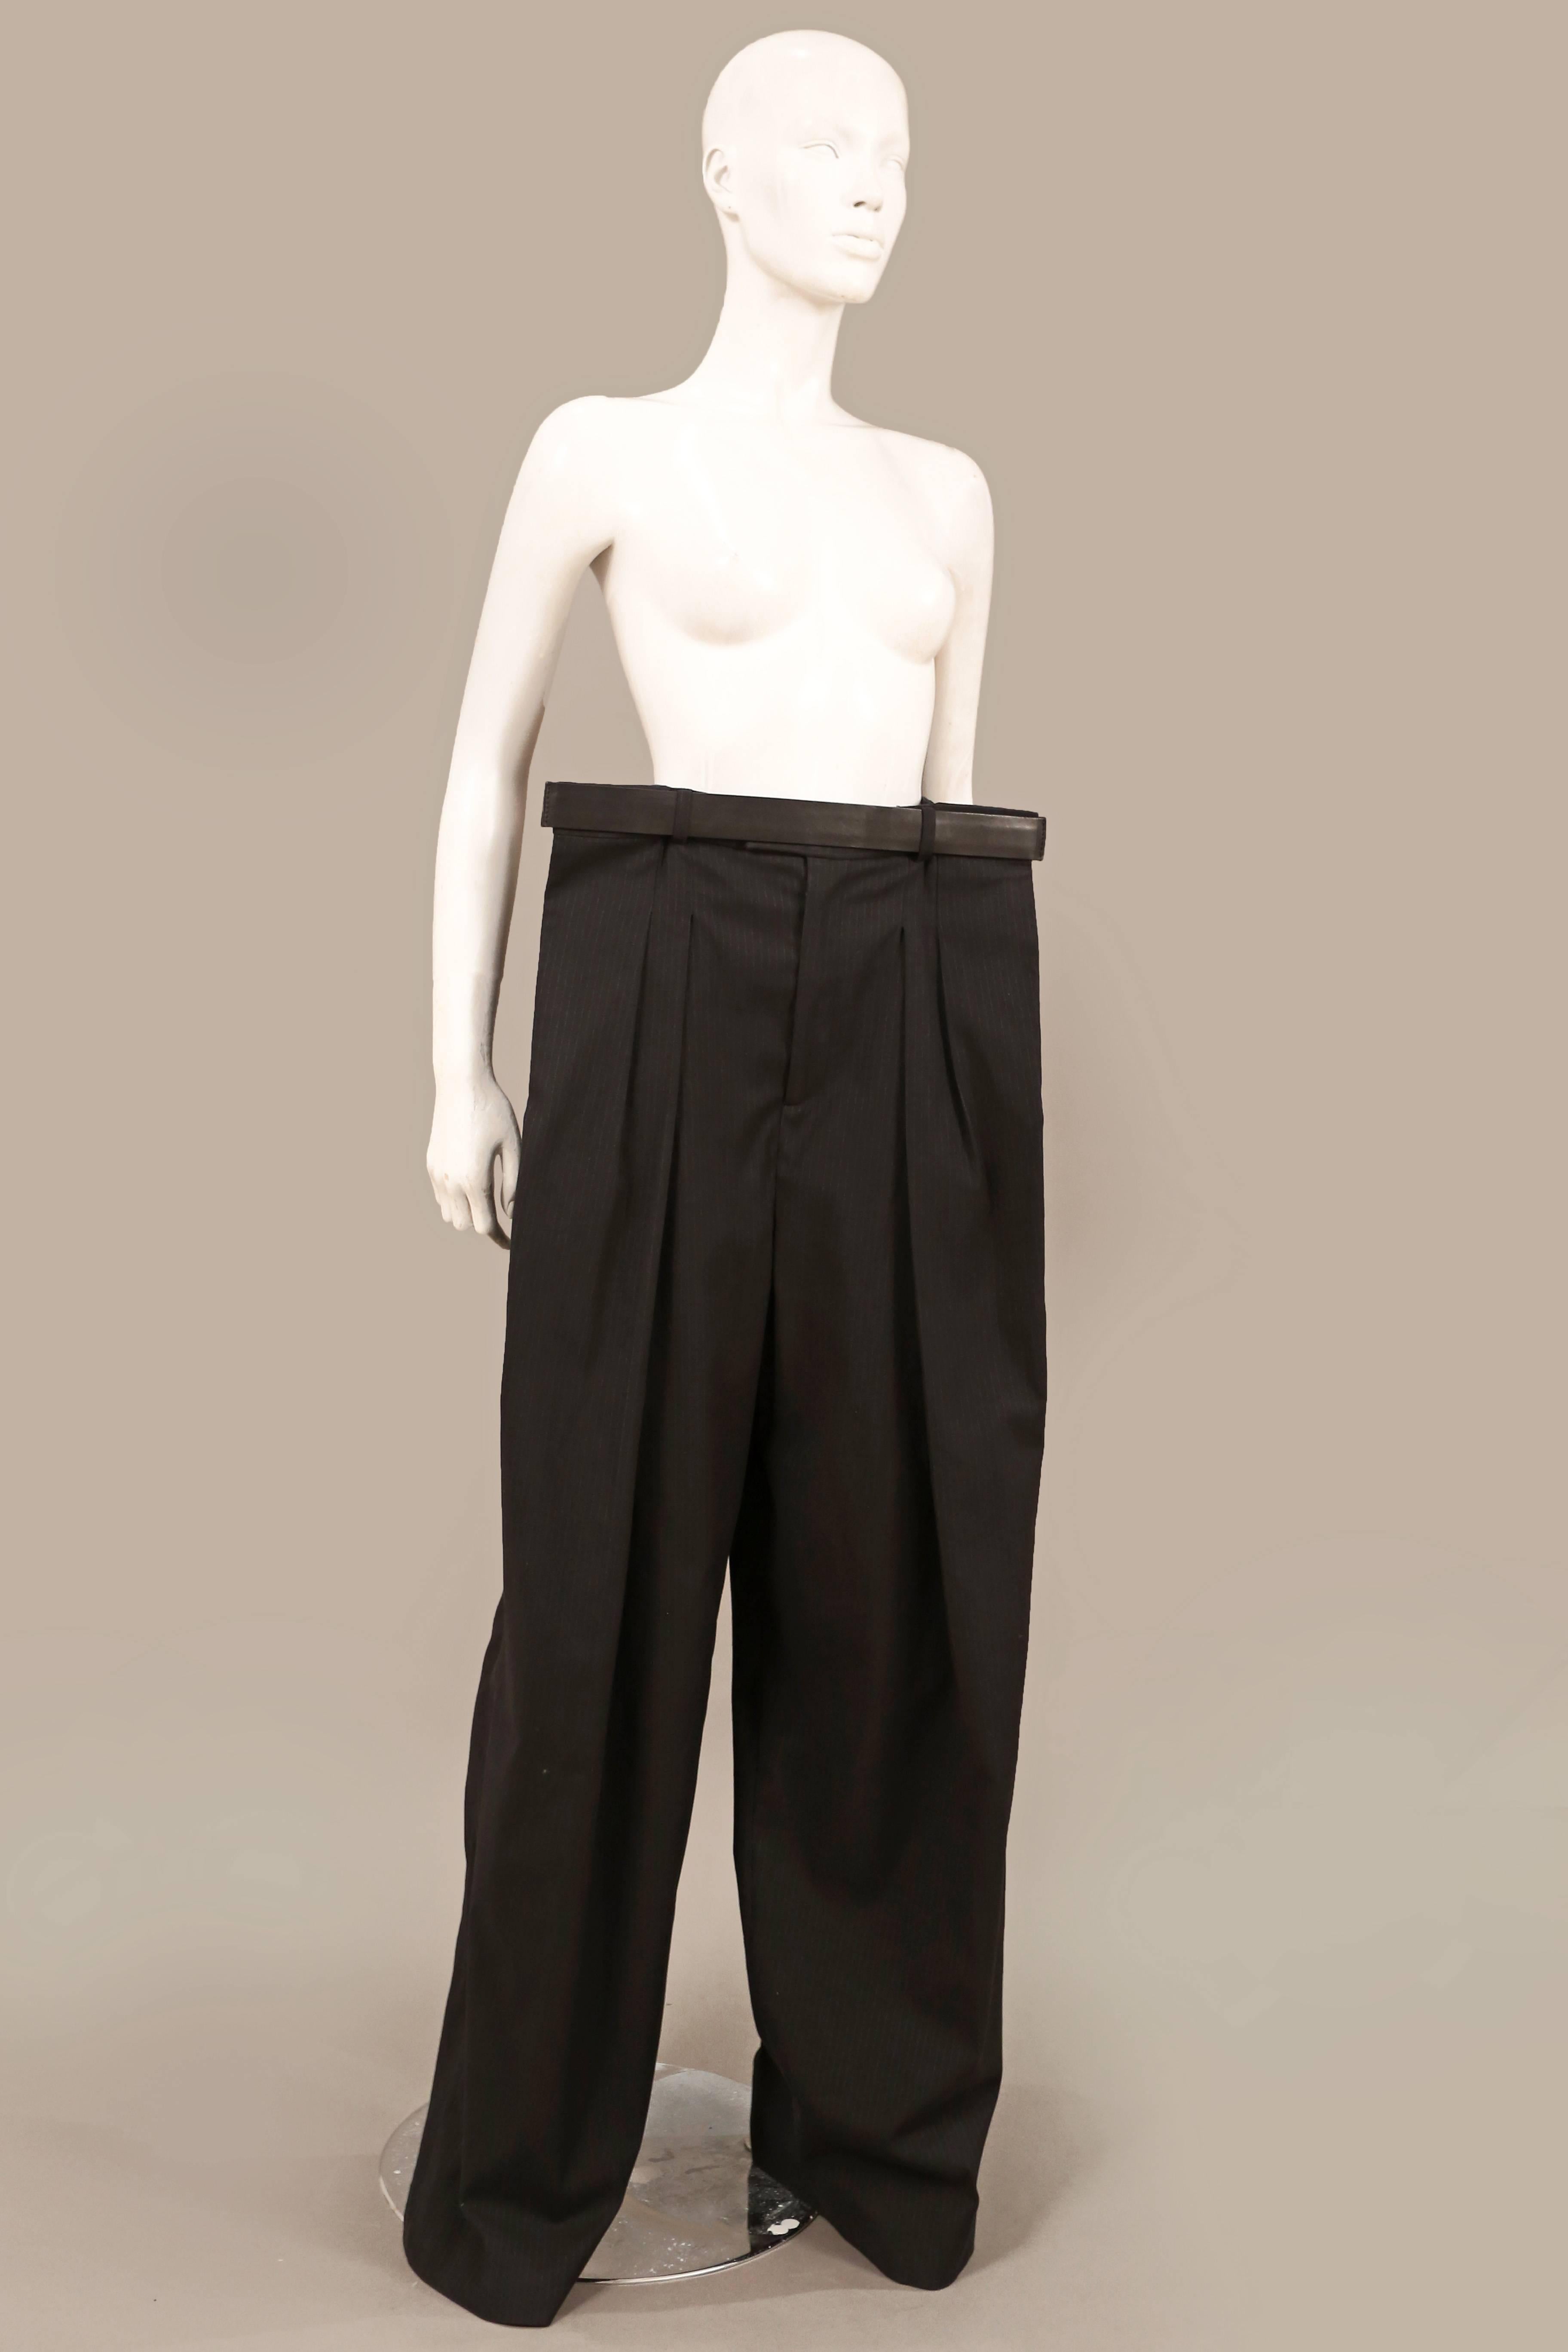 A pair of extremely rare Maison Martin Margiela extended wide leg pinstripe pants from the spring-summer 2011 runway collection. The pants features a super extended waist held together with a black leather belt, interior legging and elastic